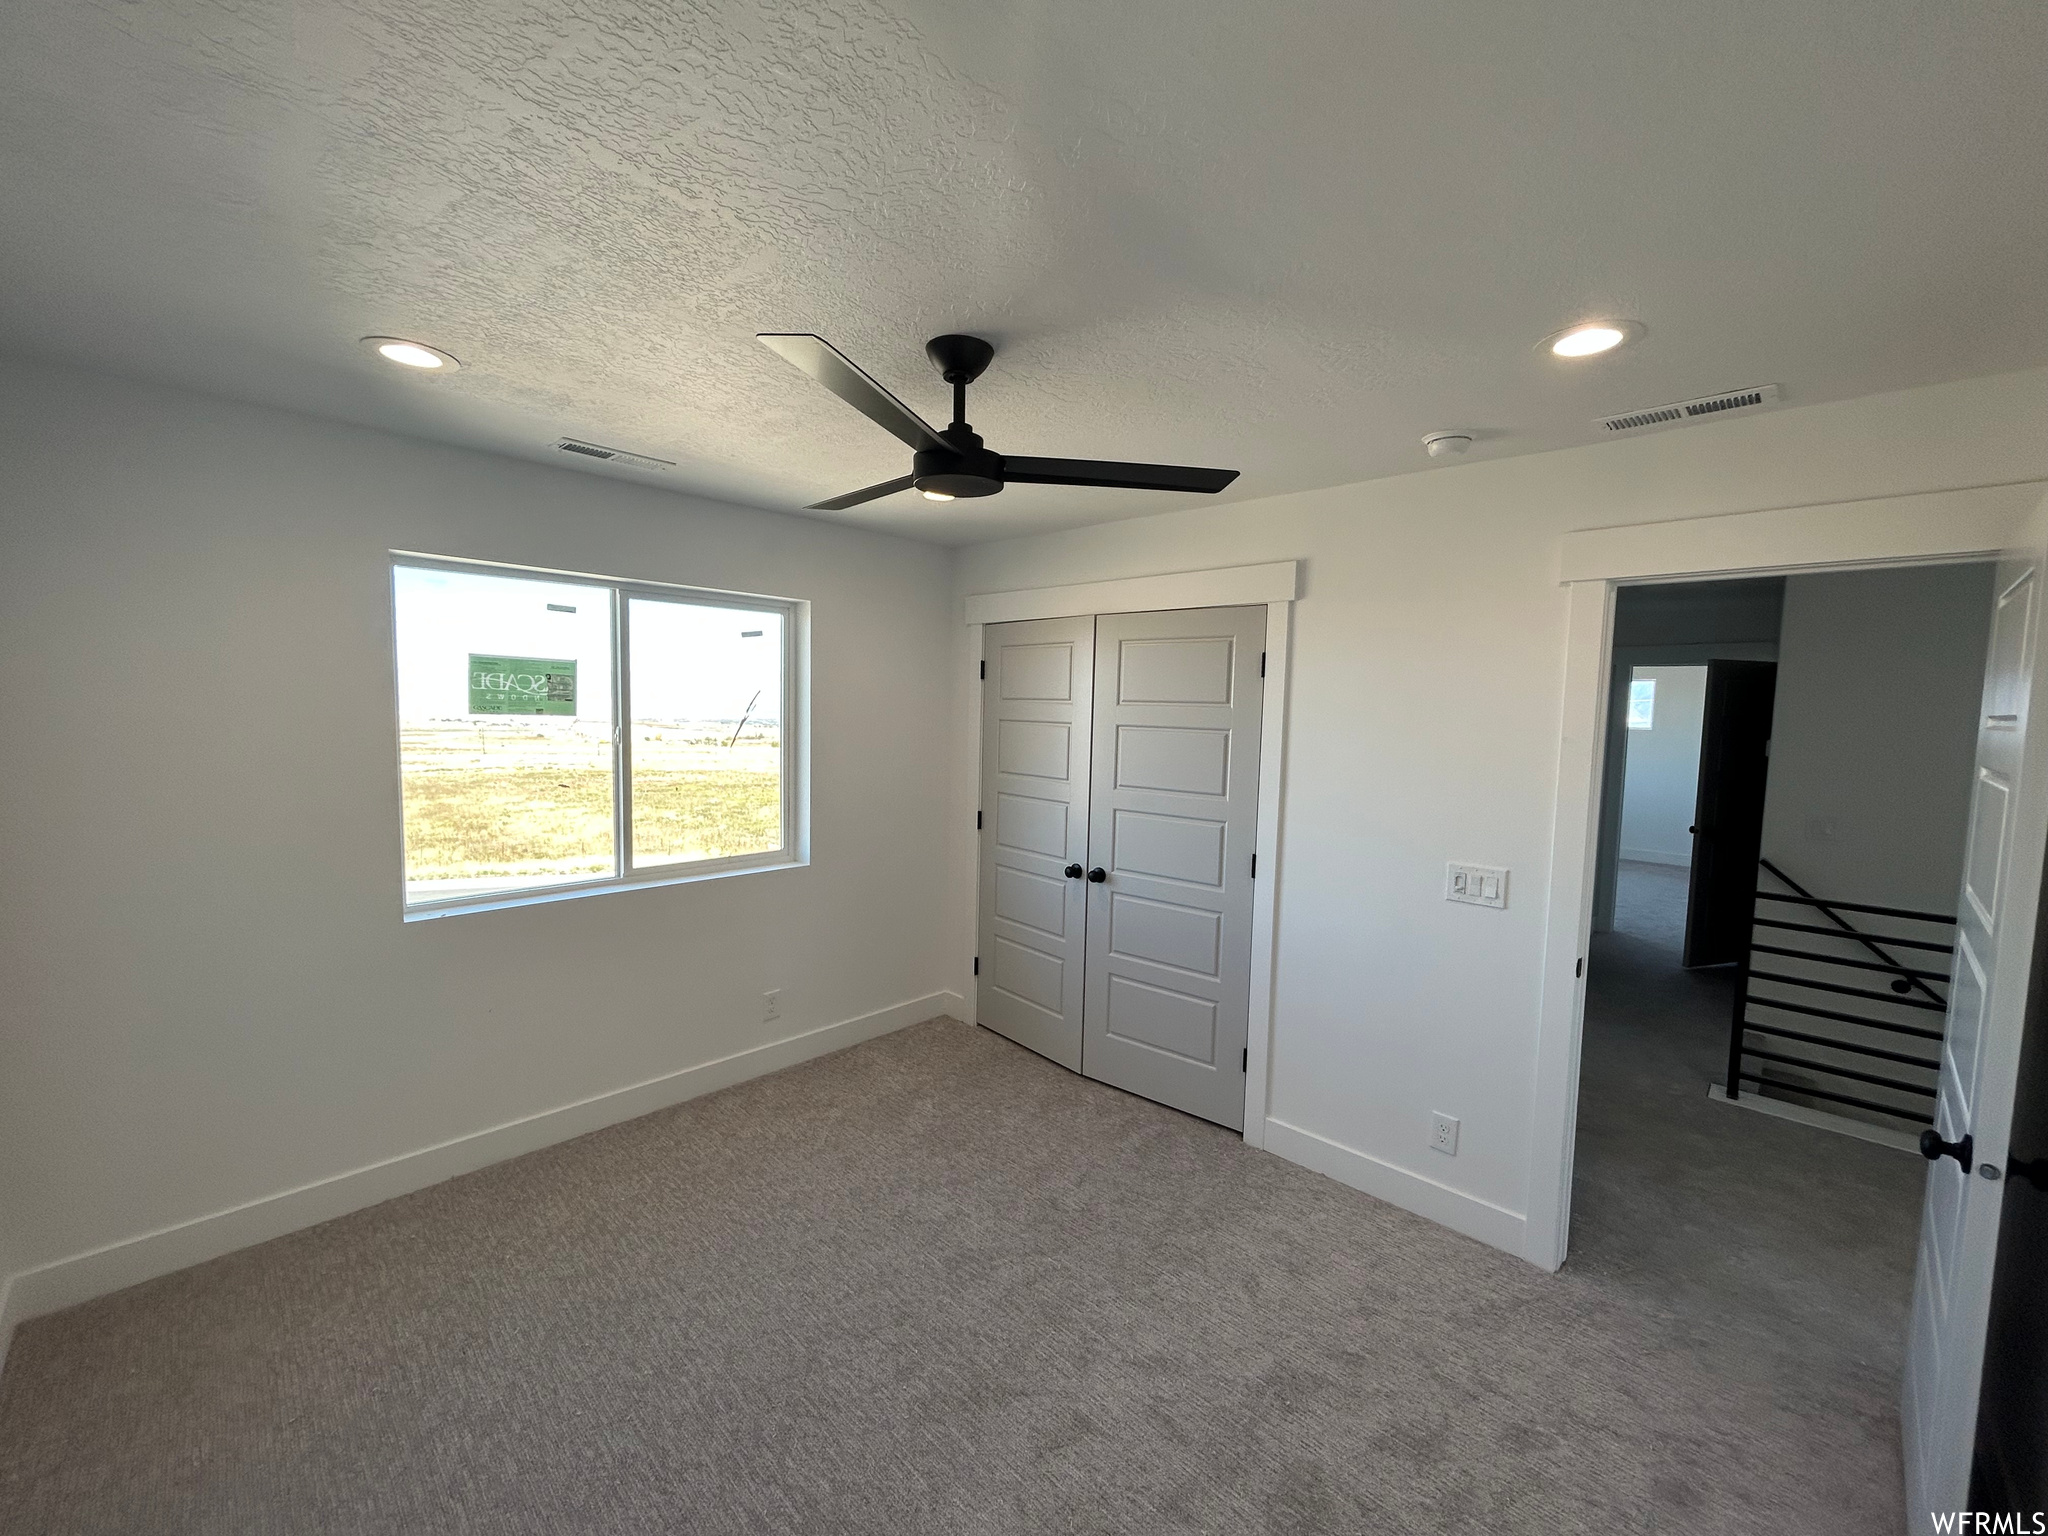 Unfurnished bedroom featuring ceiling fan, dark colored carpet, a closet, and a textured ceiling